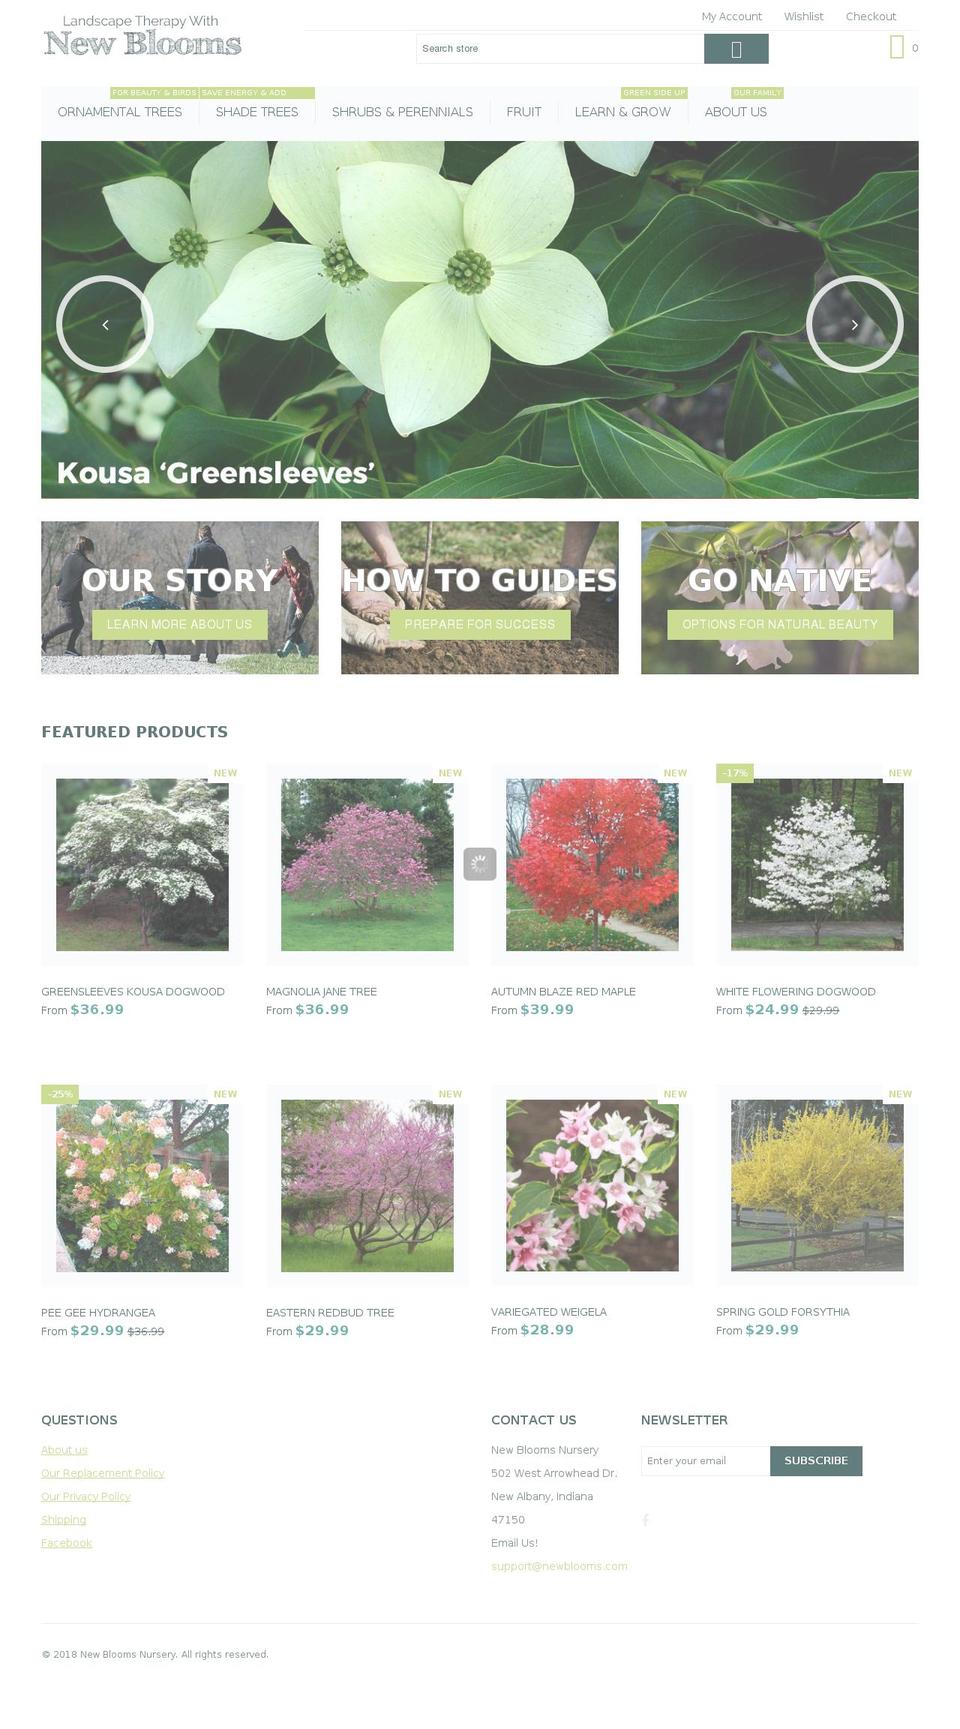 Athens Shopify theme site example newblooms.com